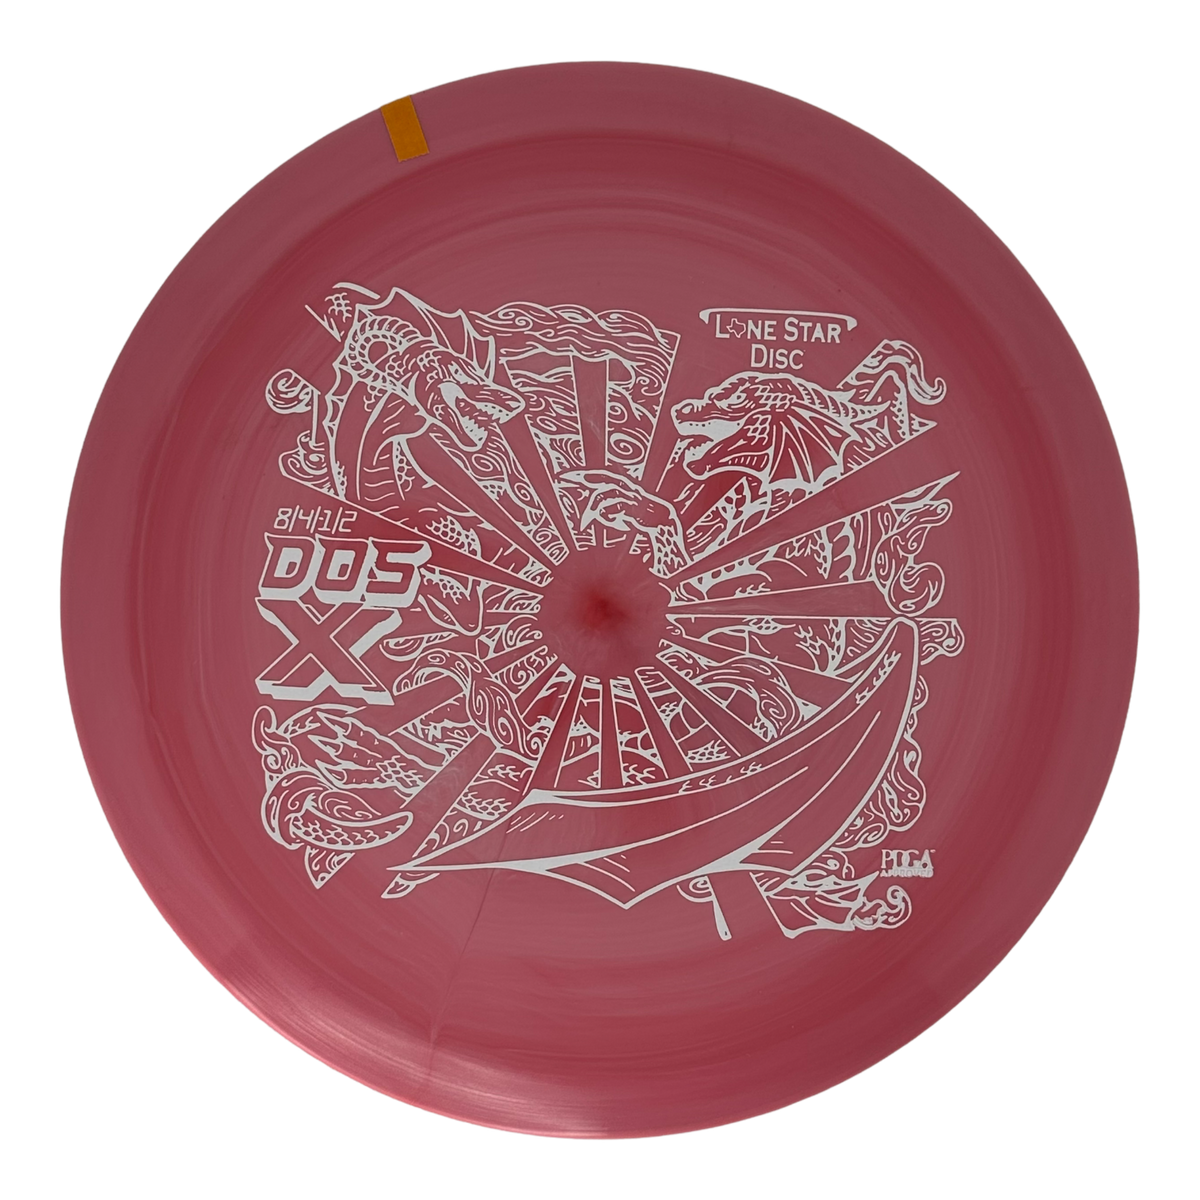 Lone Star Disc Bravo Dos X - Twin Monsters